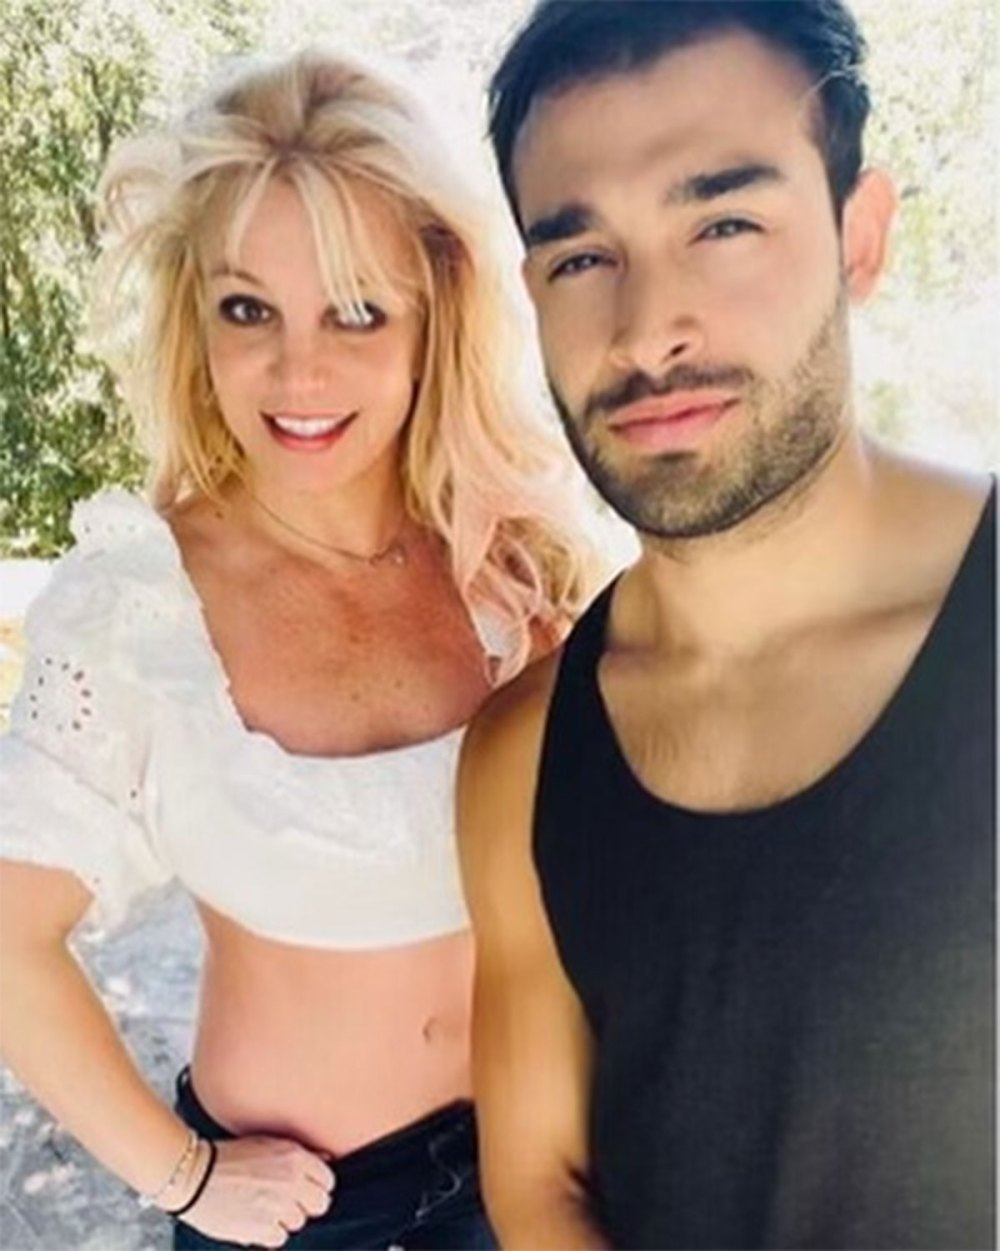 Britney Spears Thanks Fans for Support After Miscarriage 2 Sam Asghari